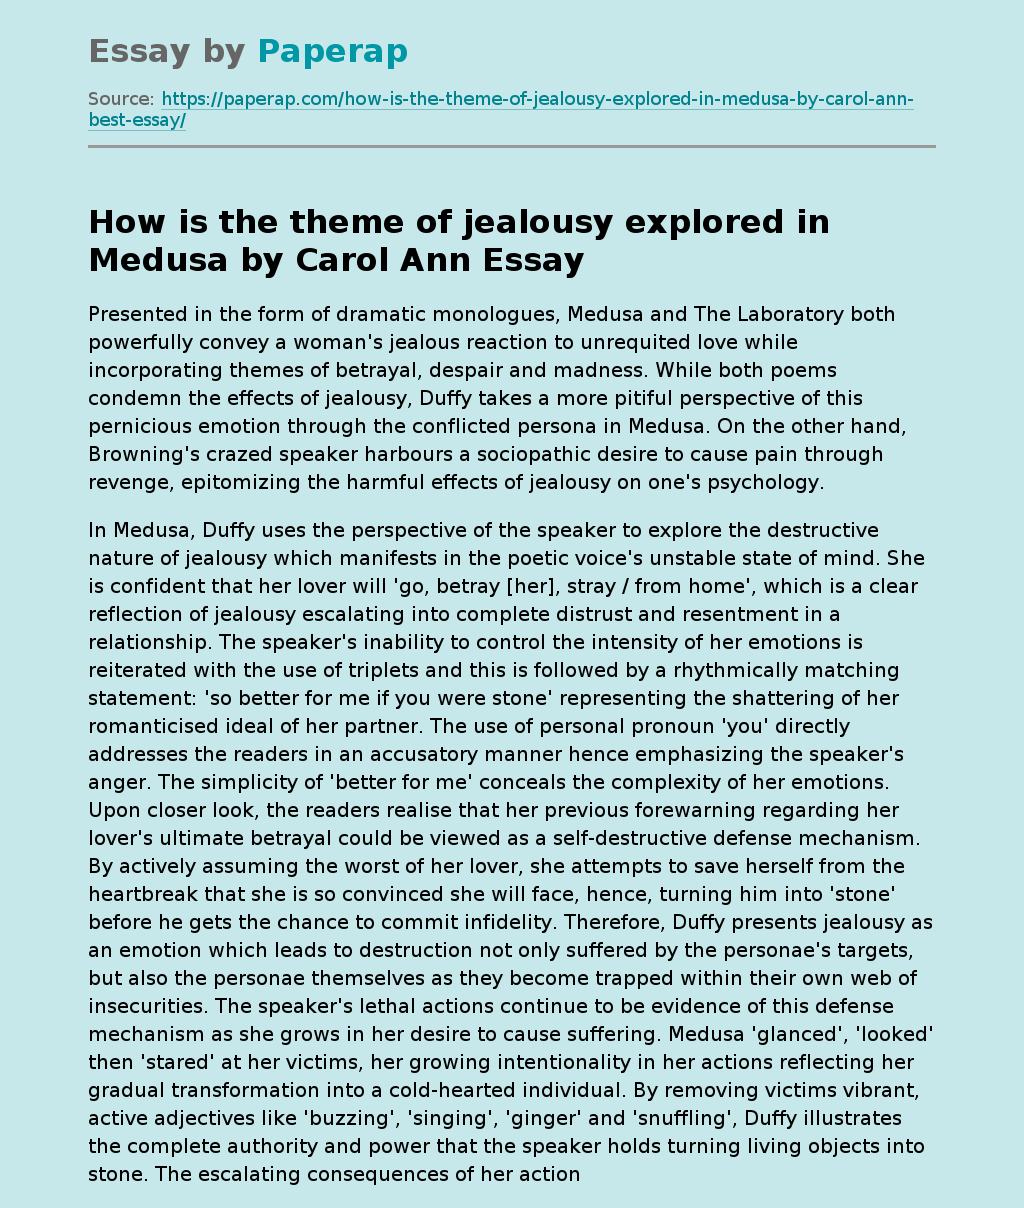 How is the theme of jealousy explored in Medusa by Carol Ann